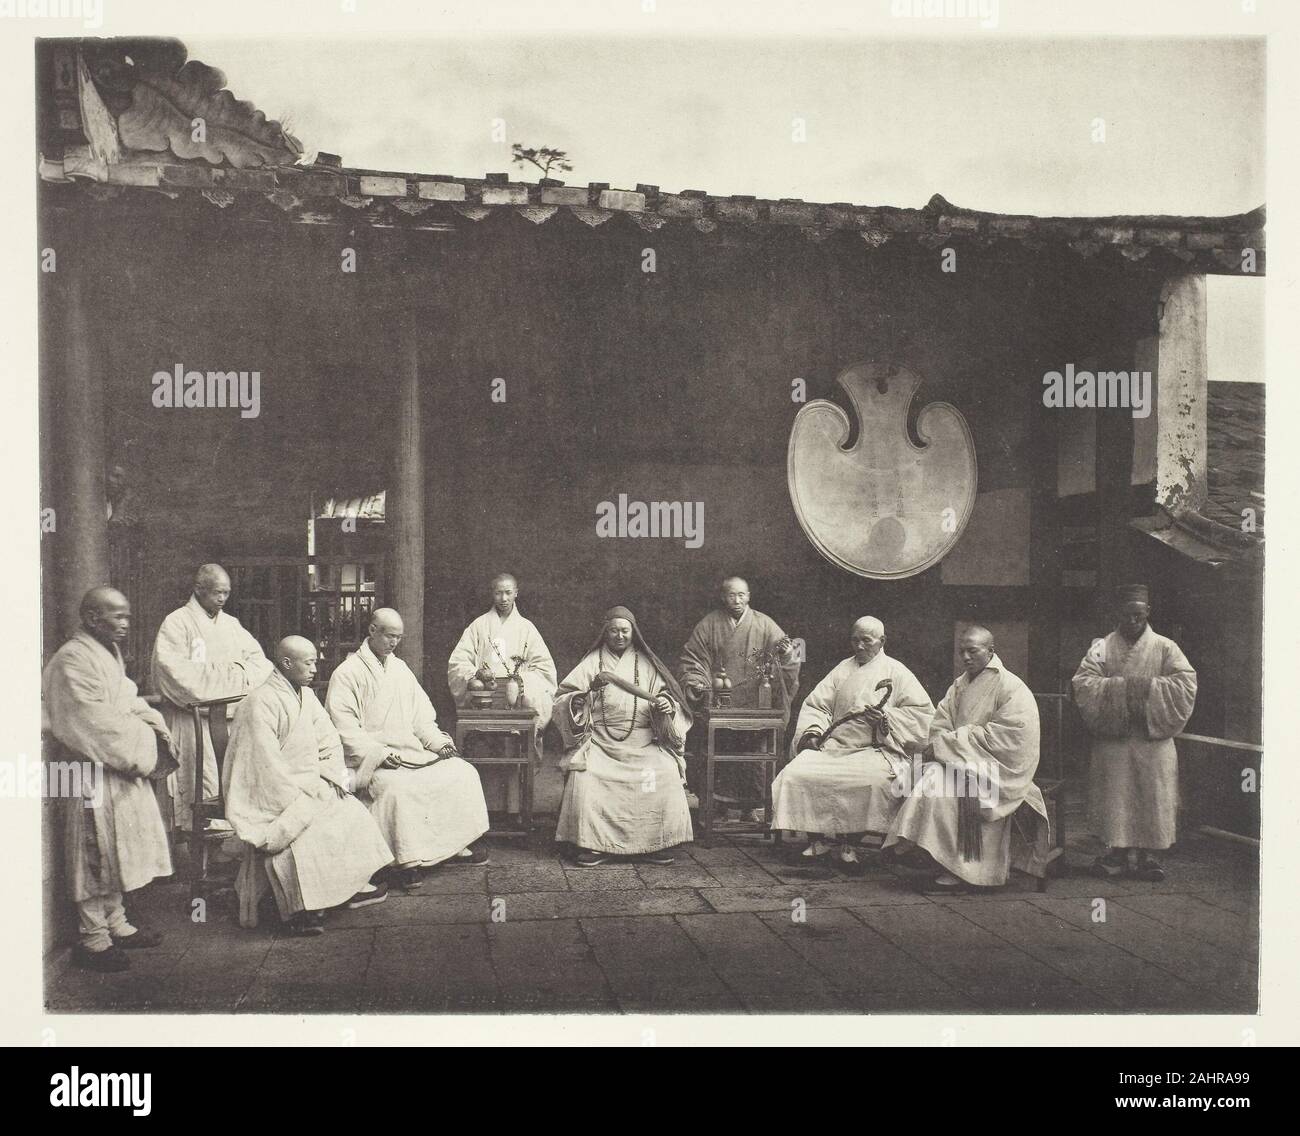 John Thomson. The Abbot and Monks of Kushan. 1863–1873. Scotland. Collotype, pl. XVIII from the album Illustrations of China and its People, Volume II (1873) Stock Photo